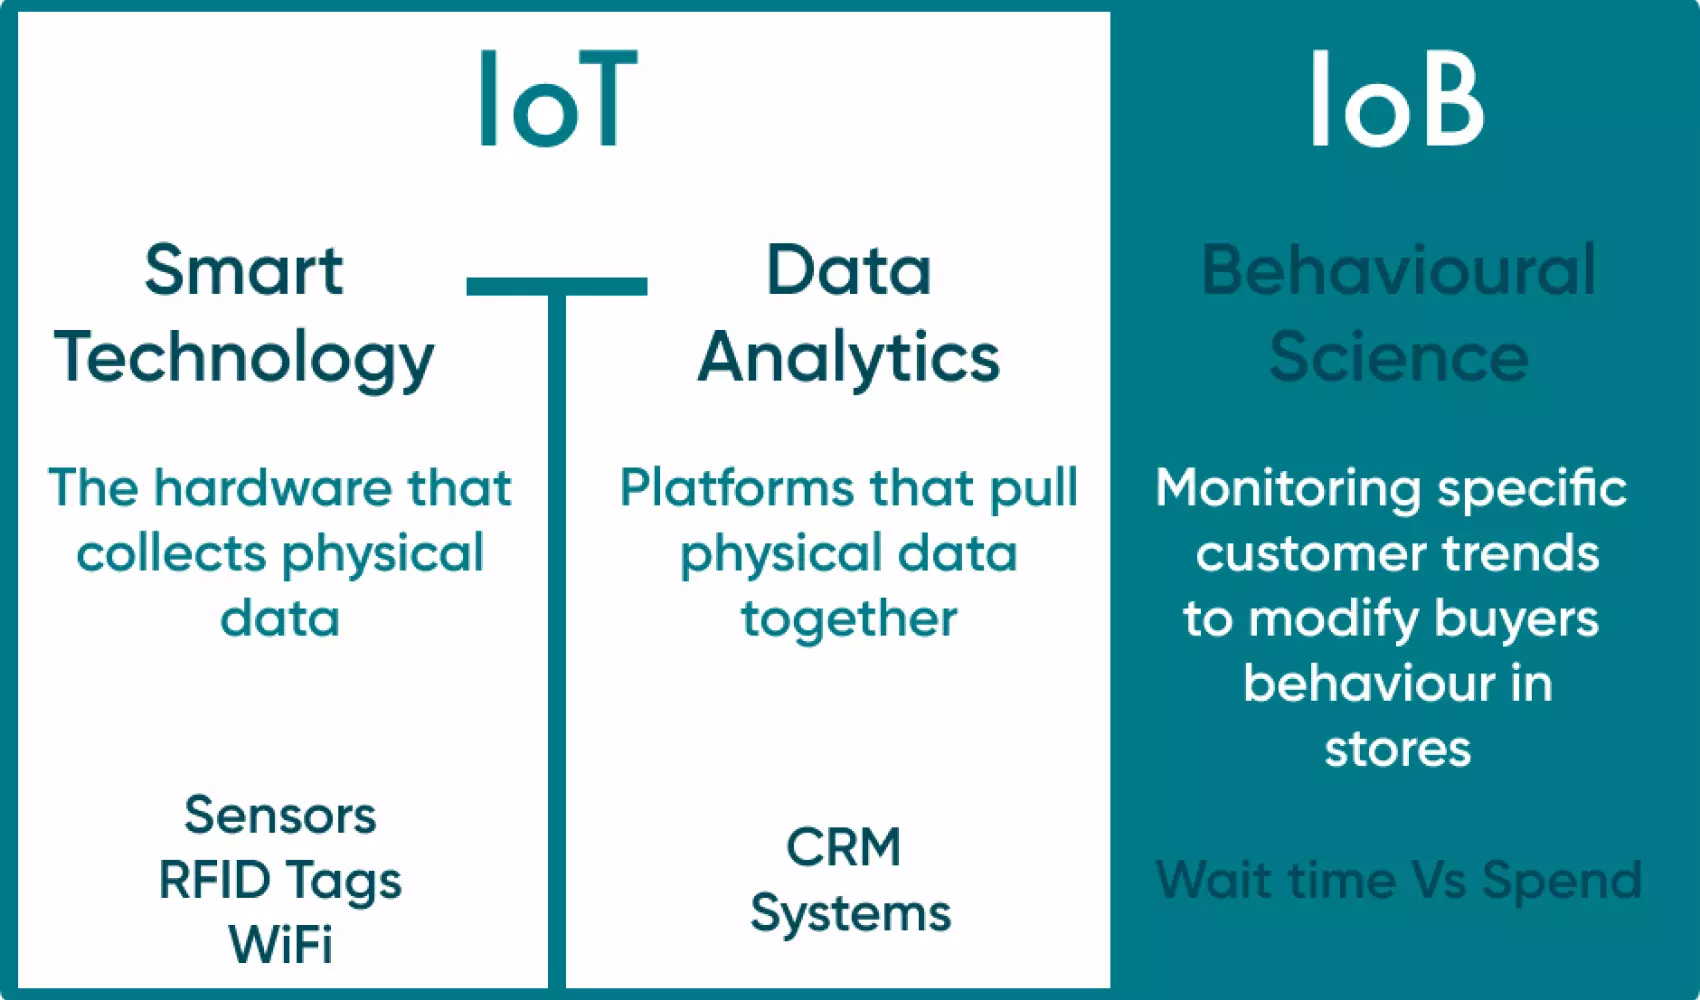 A comparison between and a look at the differences of IoT and IoB.